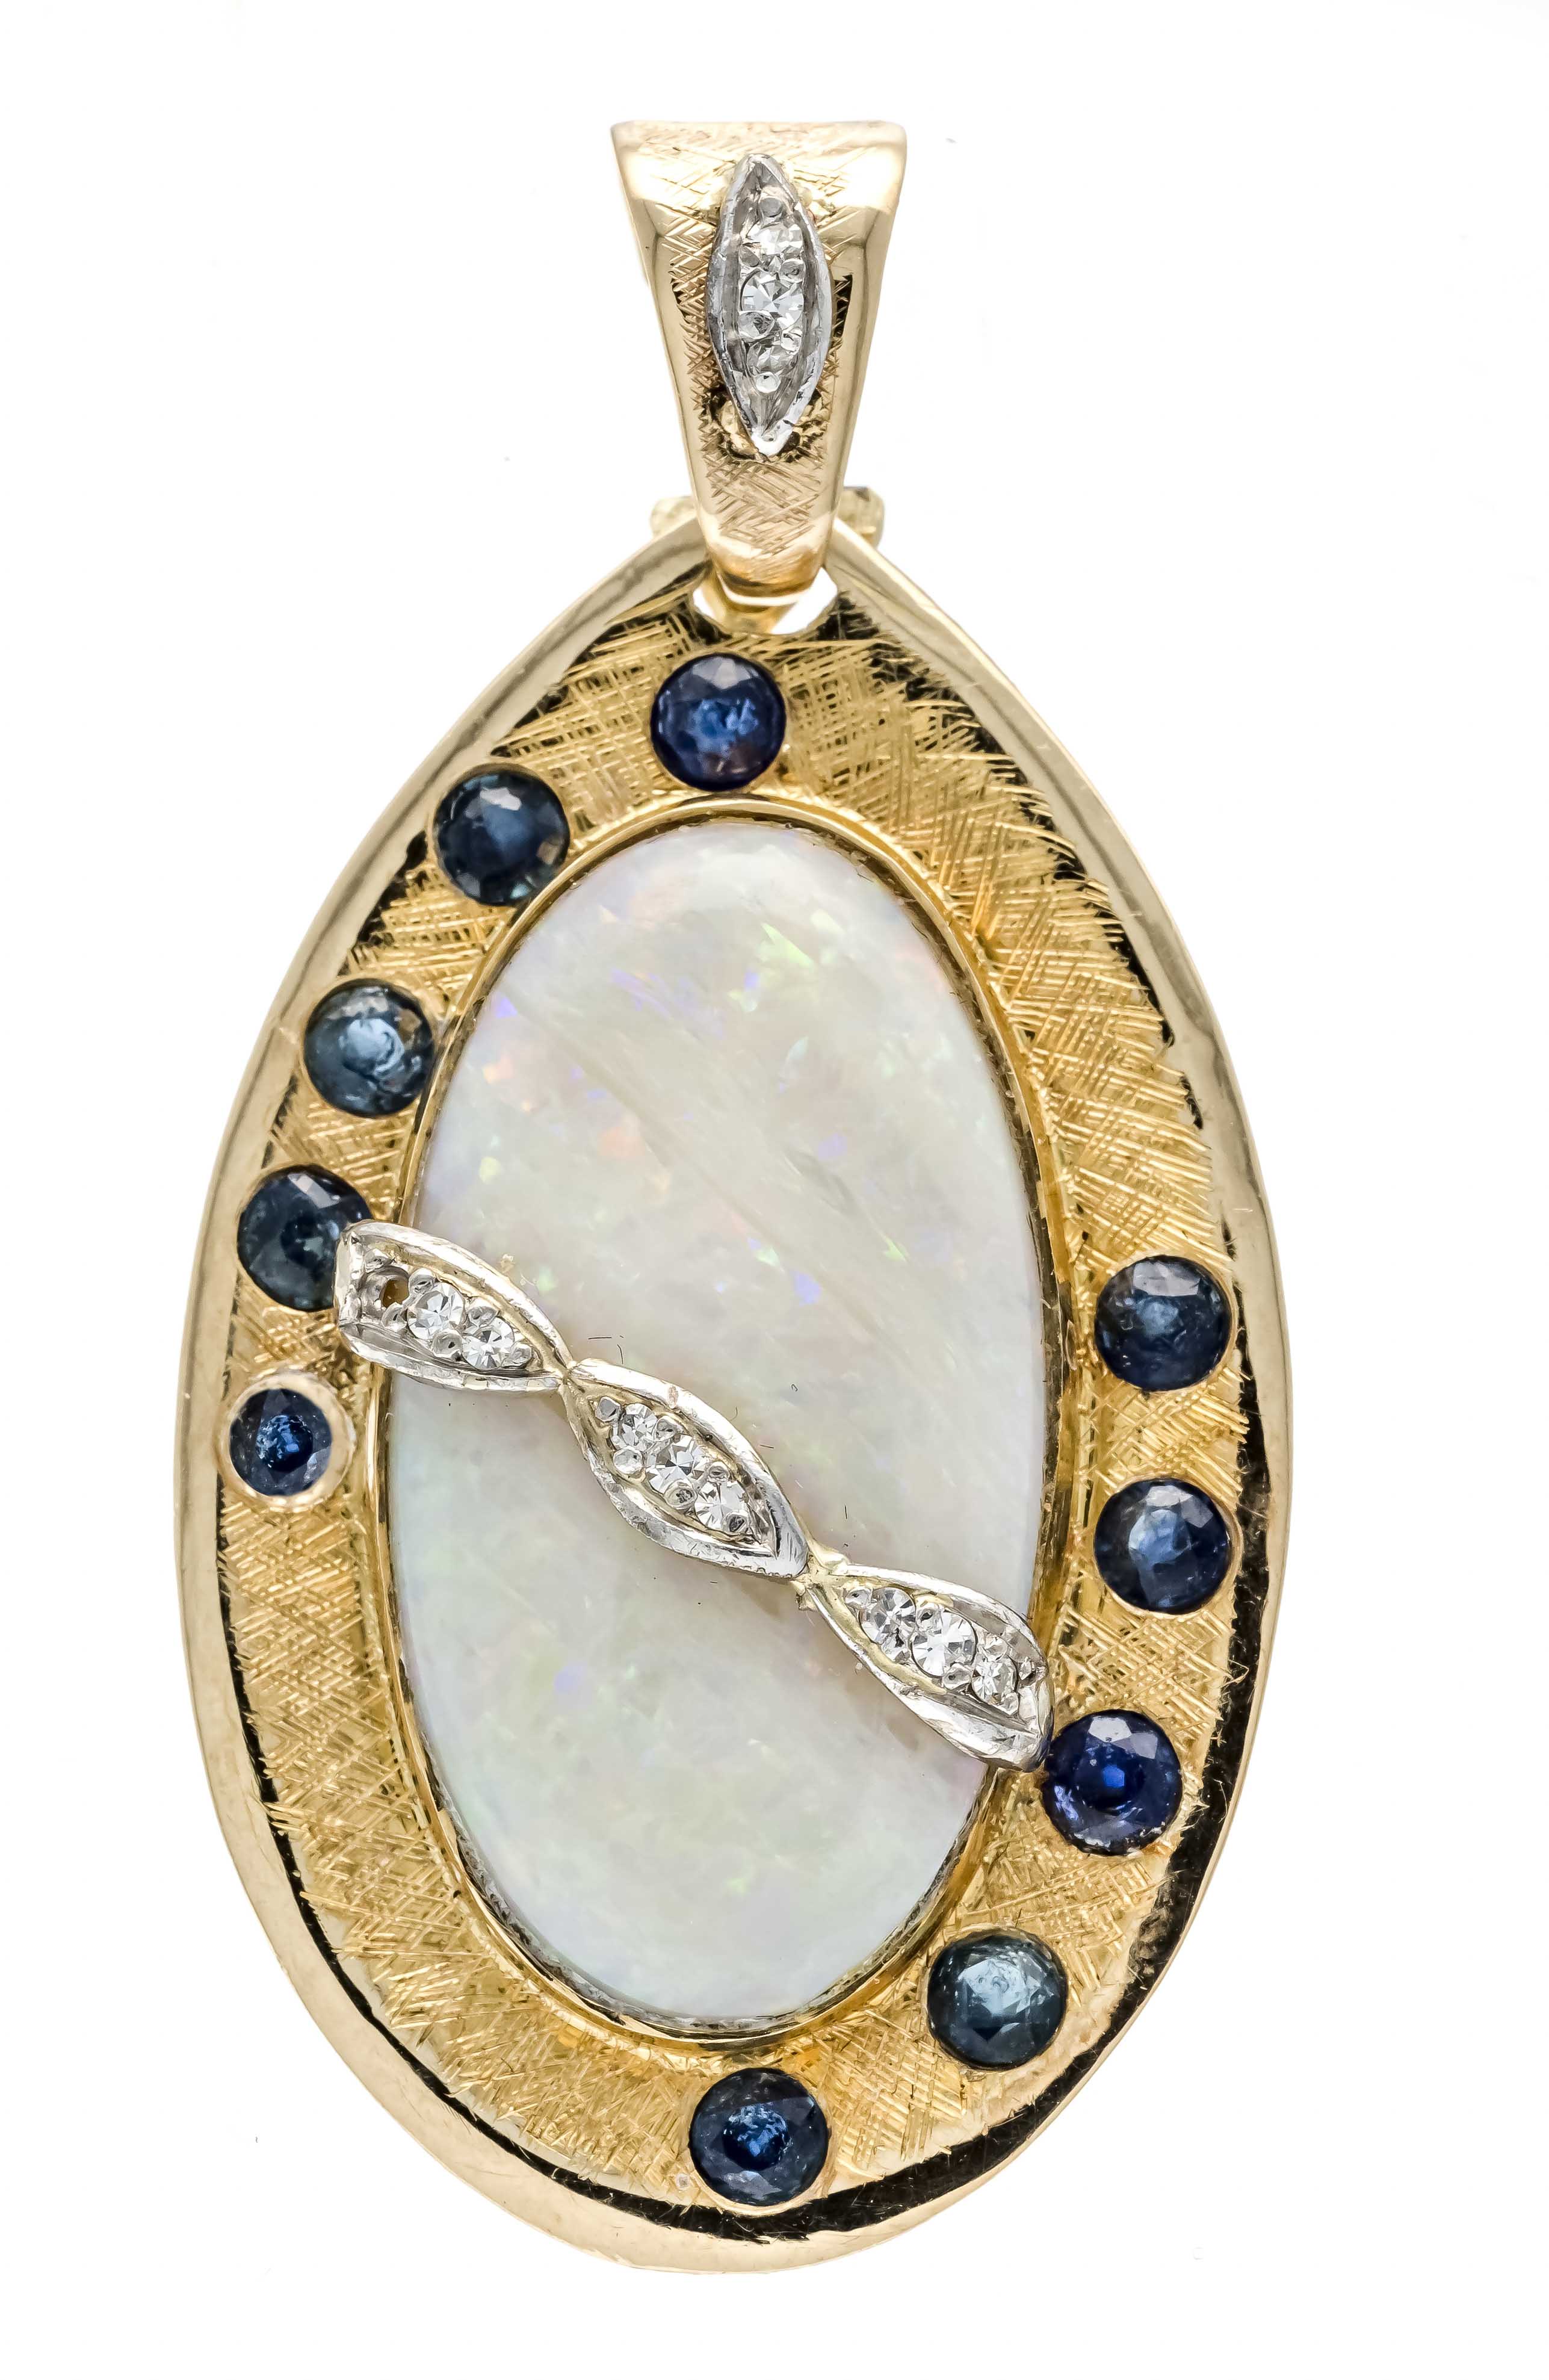 Opal clip pendant GG/WG 585/000 with an oval opal cabochon 29 x 15 mm in a light to good play of